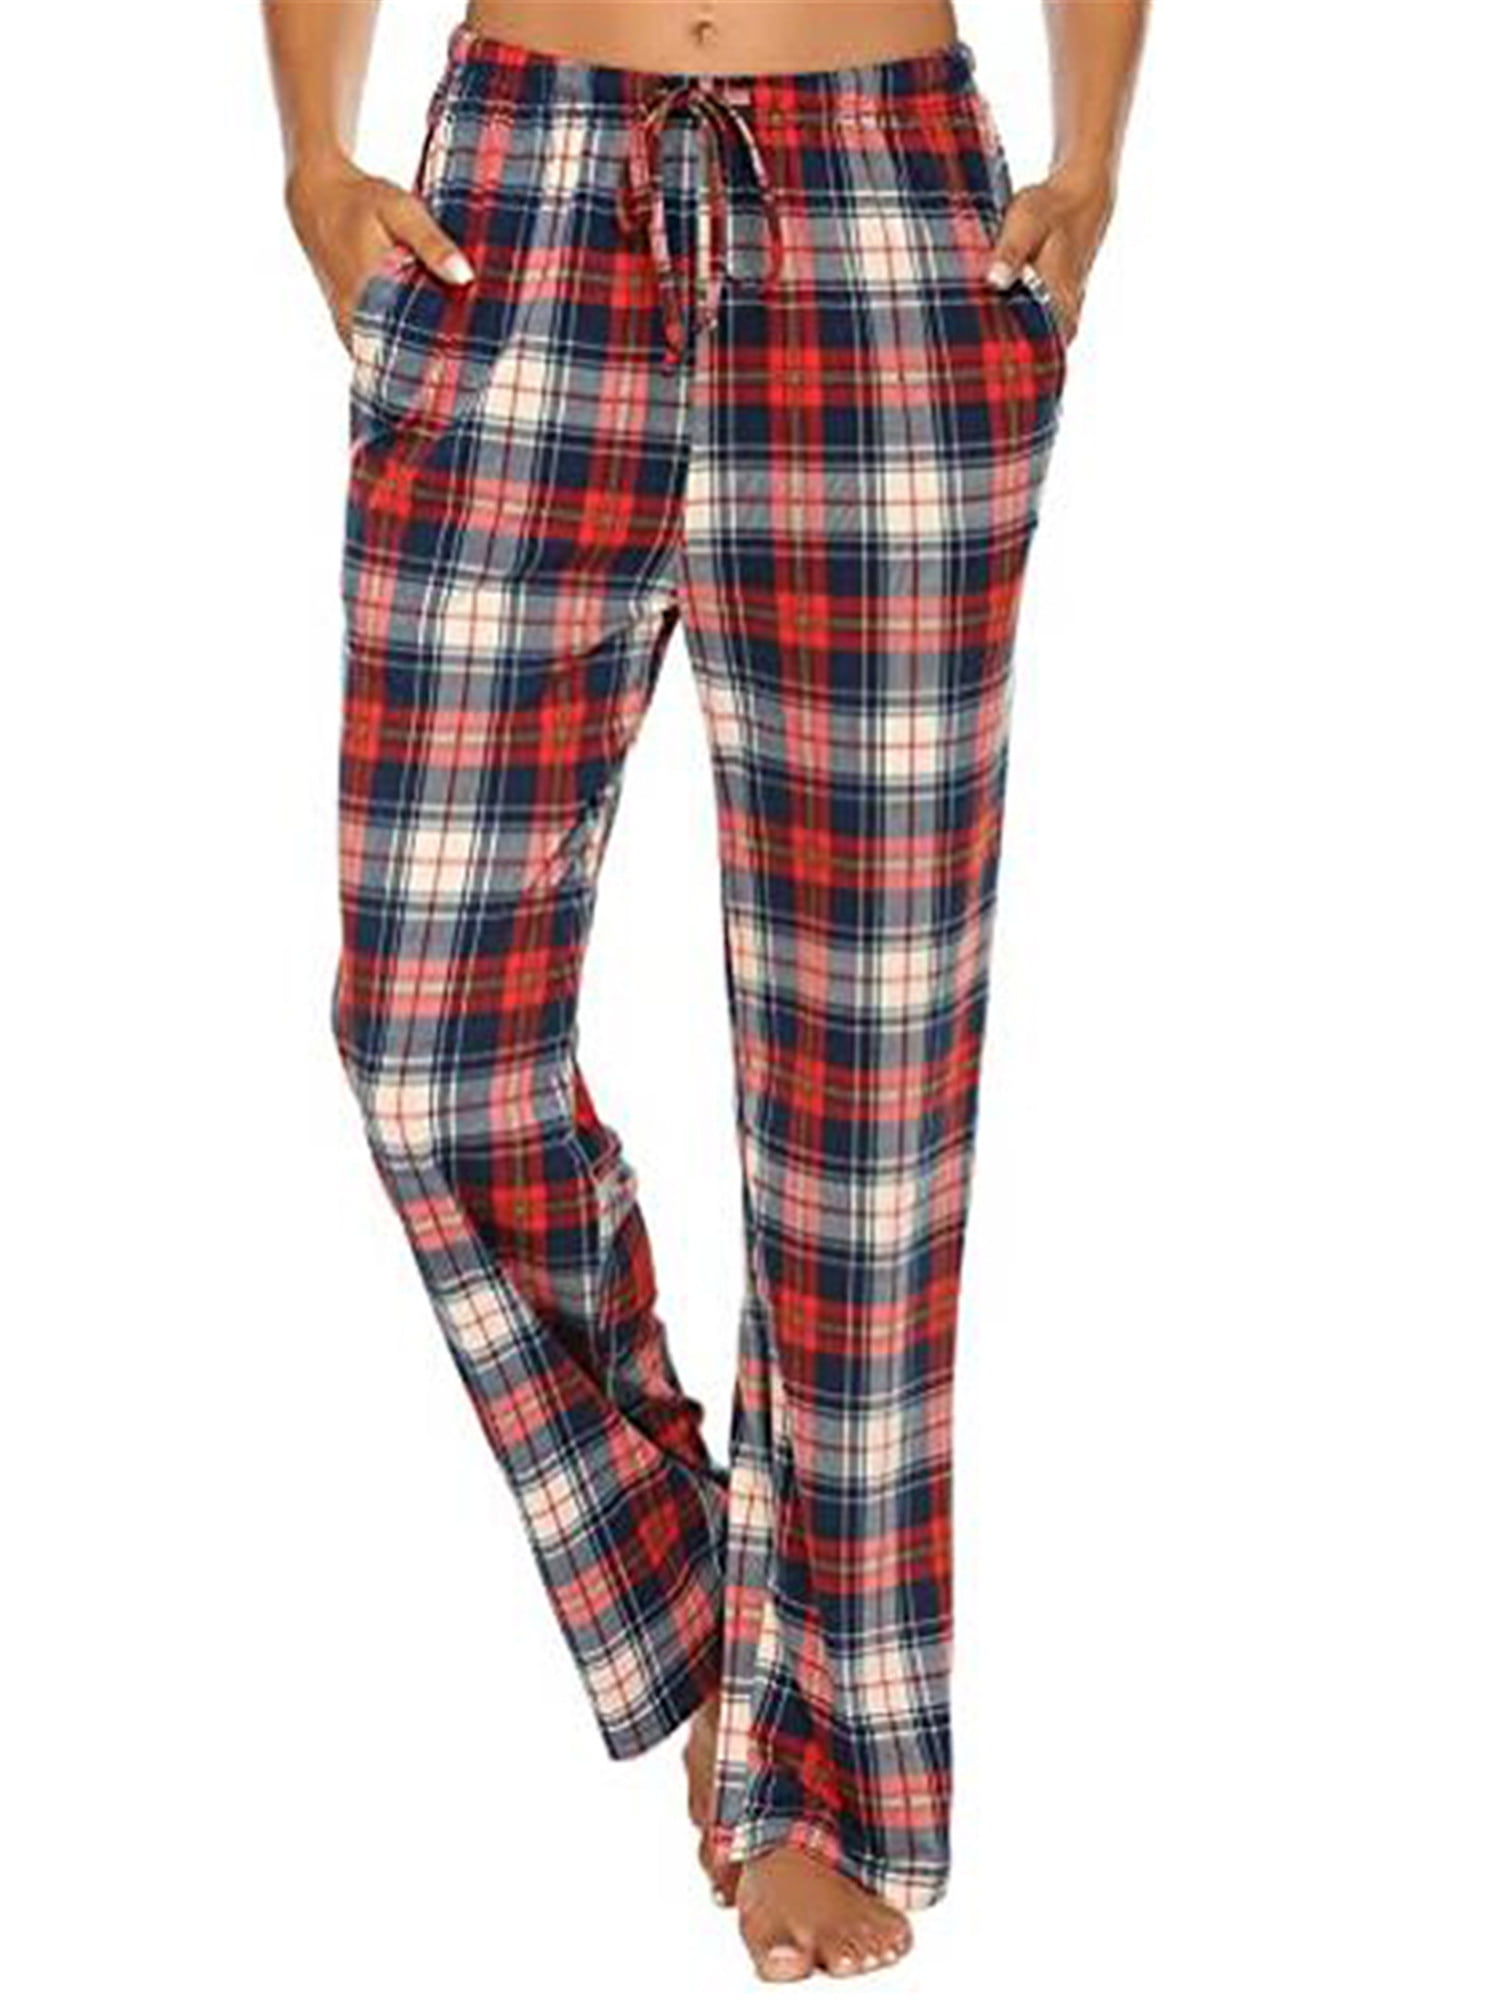 Pin by Liana Minassian on My New Style | Red plaid pants 